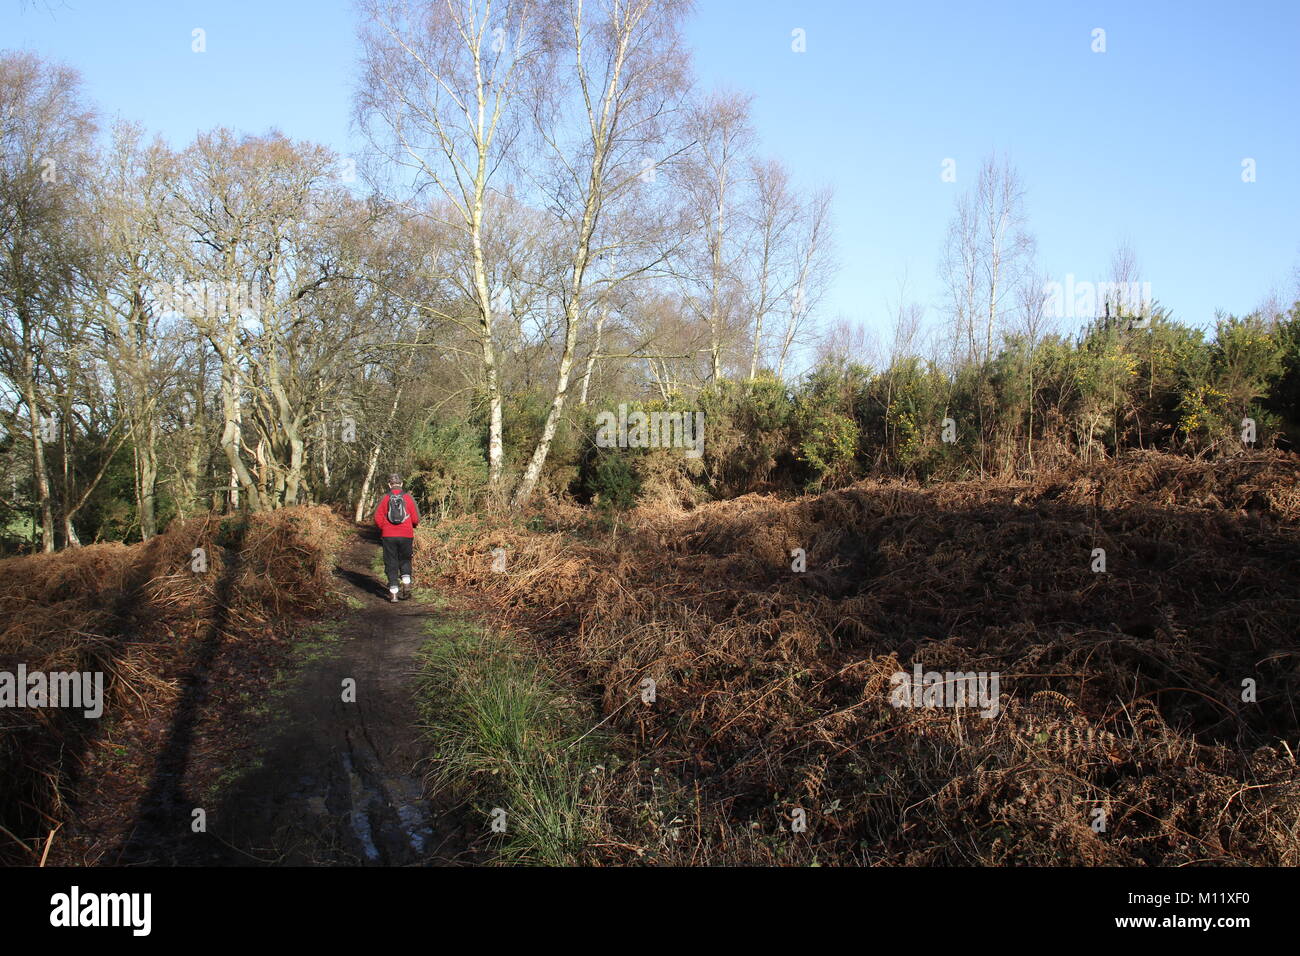 Rear view of one female walker entering a forest of trees on Thursley Common, Surrey, England. Stock Photo